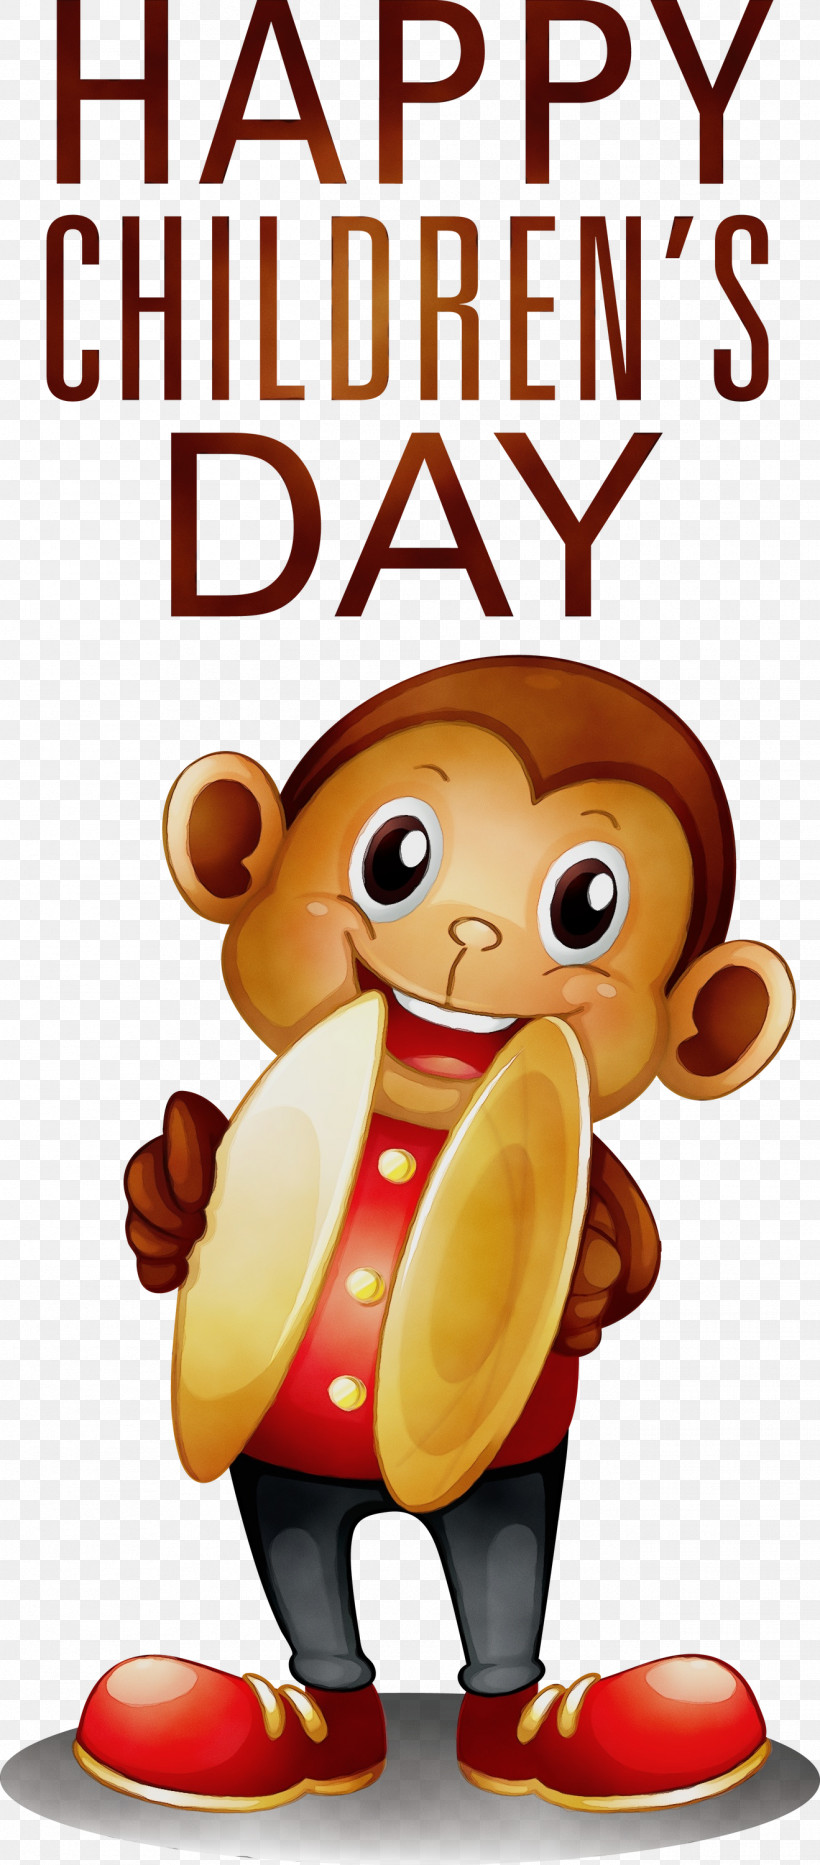 Cymbal Cymbal-banging Monkey Toy Drawing Cartoon Percussion, PNG, 1319x3000px, Happy Childrens Day, Cartoon, Cymbal, Cymbalbanging Monkey Toy, Drawing Download Free